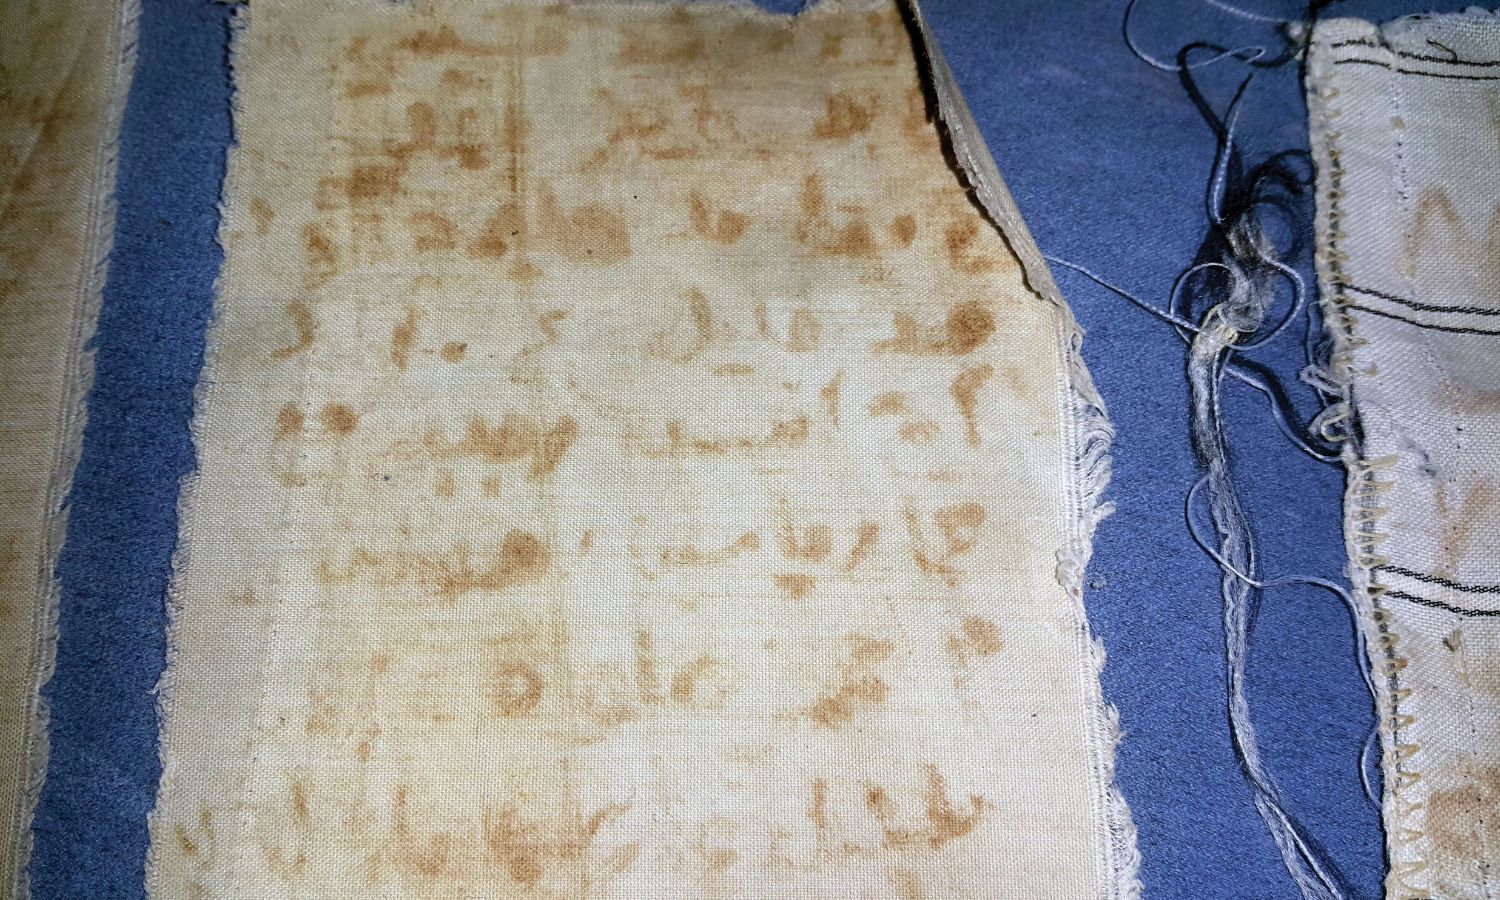 Five strips of ripped cloth with the names list which Mansour al-Omari smuggled out of prison and contacted the families of the detainees whose names were written on the cloth to inform them of the whereabouts of their loved ones and that they were alive. © Enab Baladi/ Mansour al-Omari.